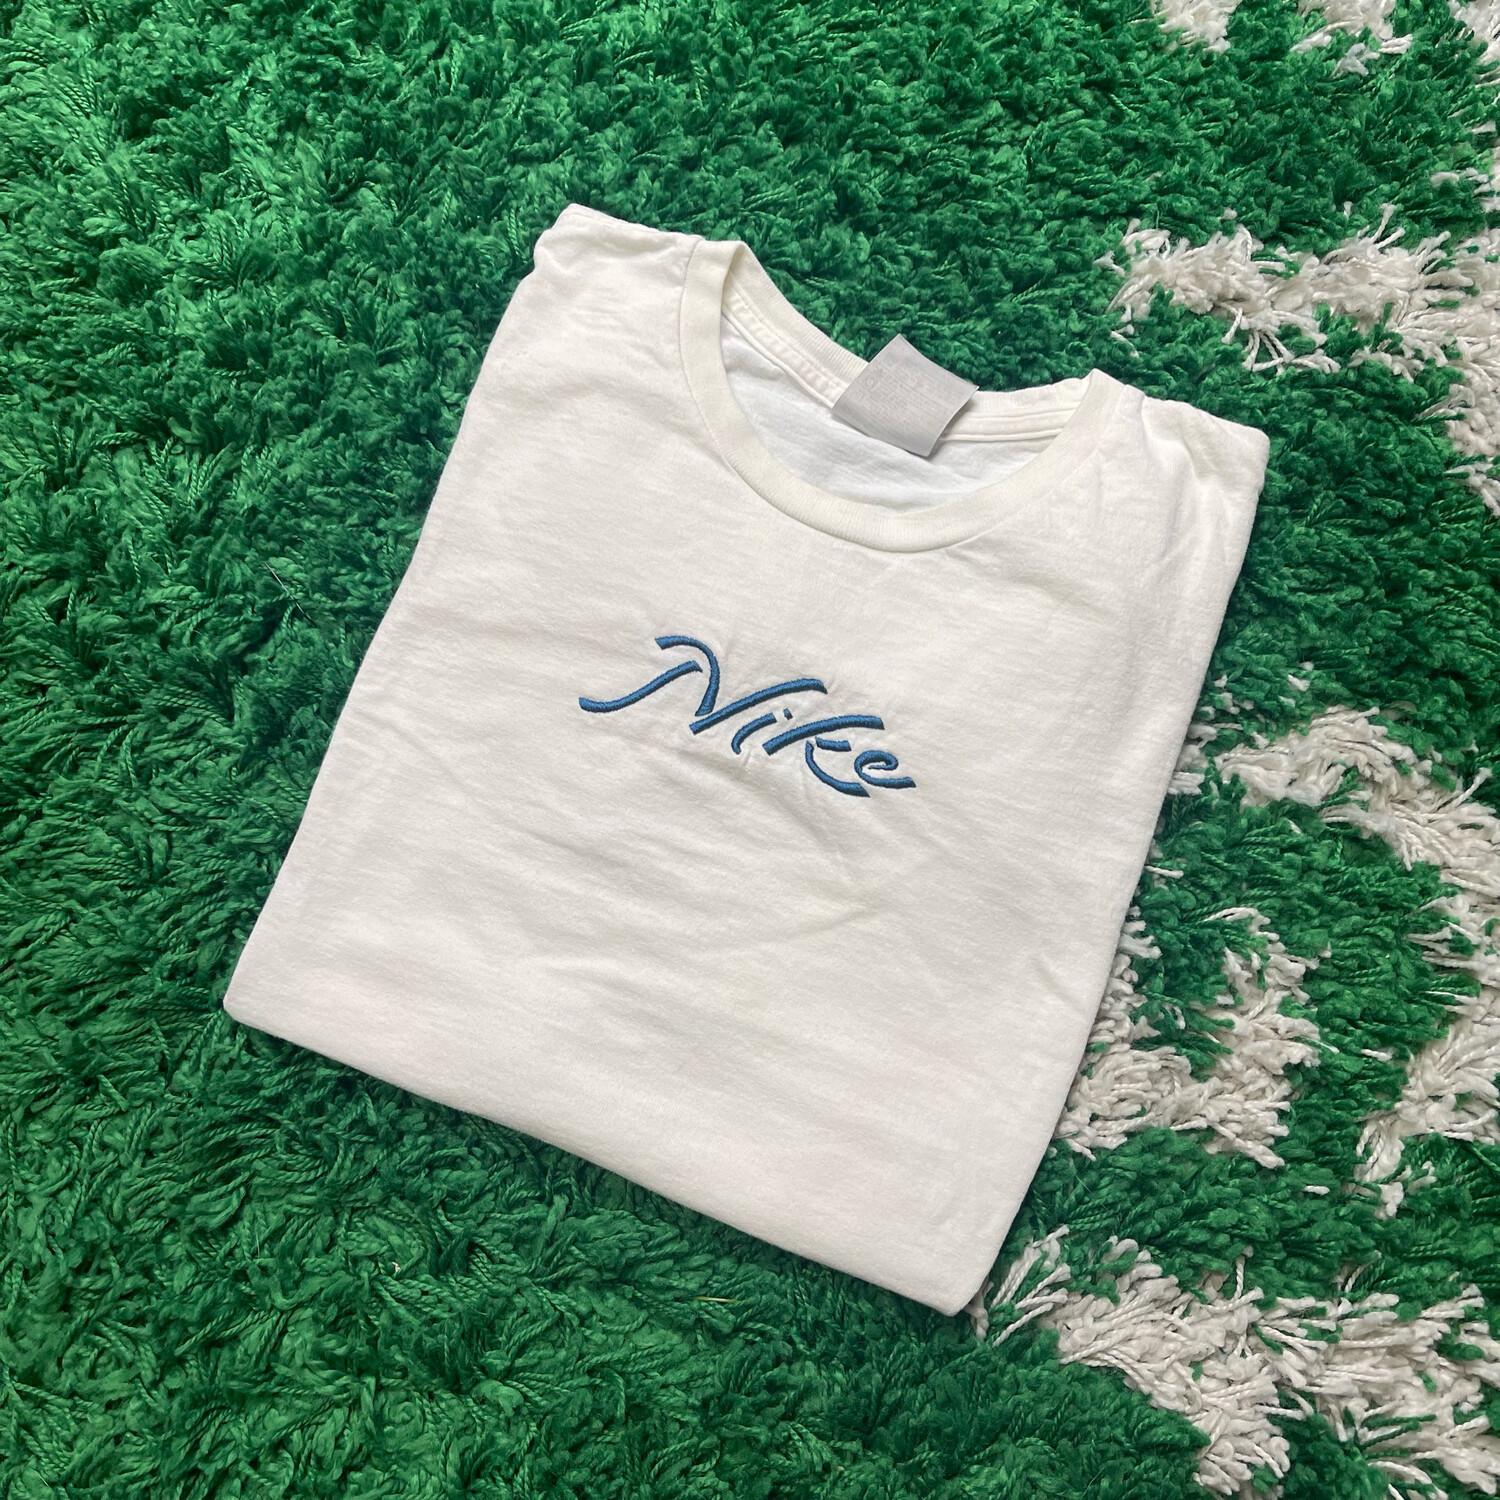 Nike Embroidered Spellout White Blue Size Small